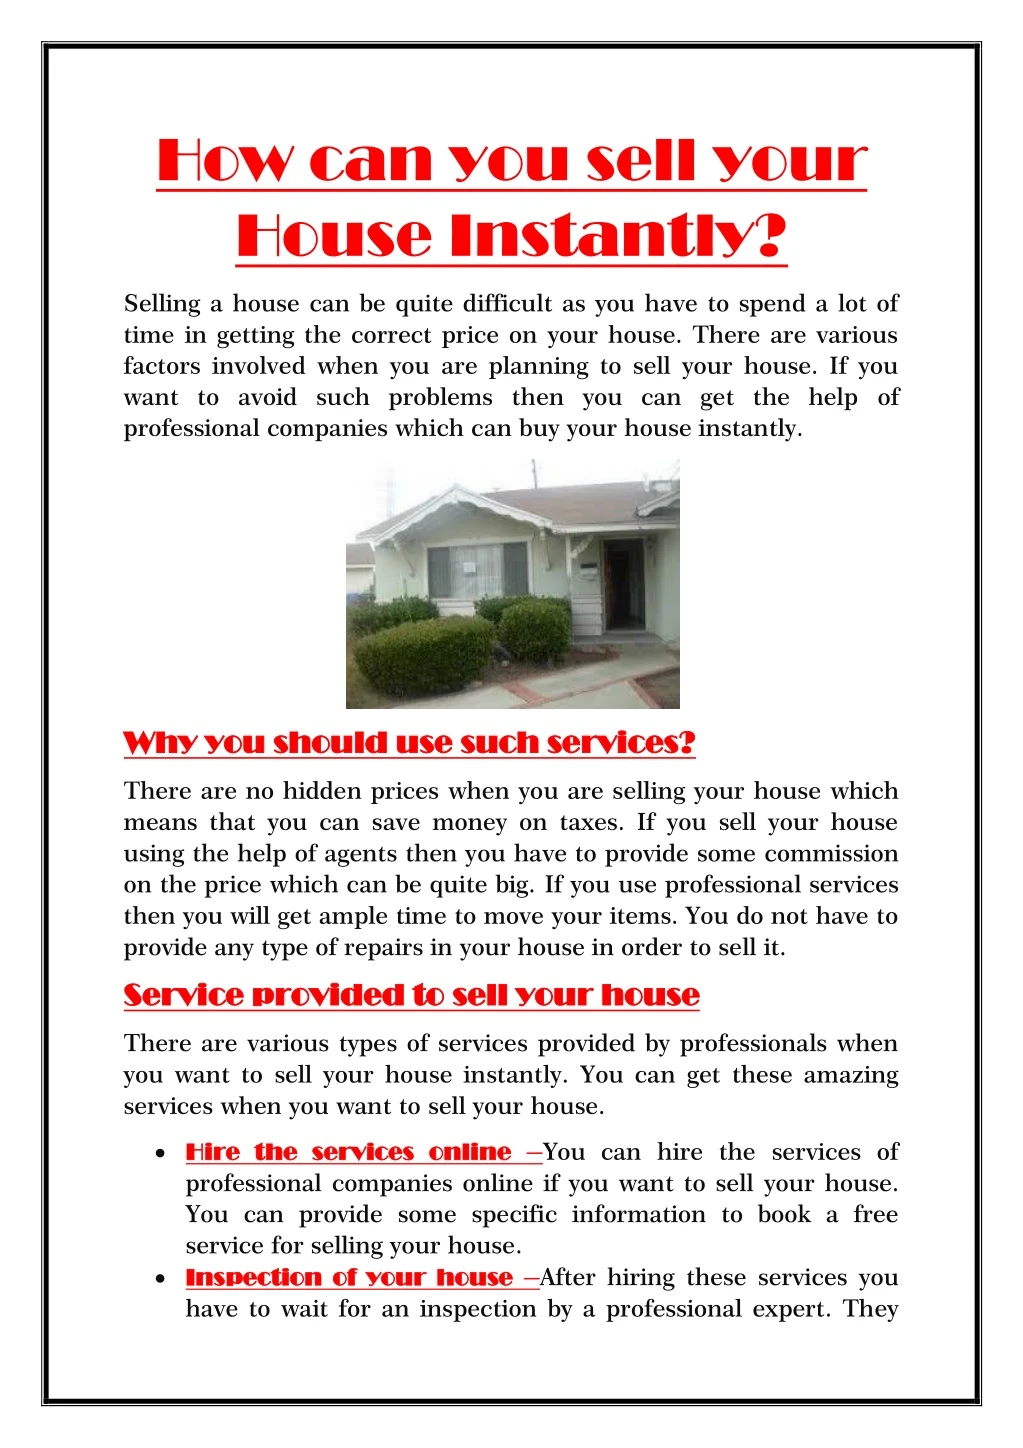 how can you sell your house instantly